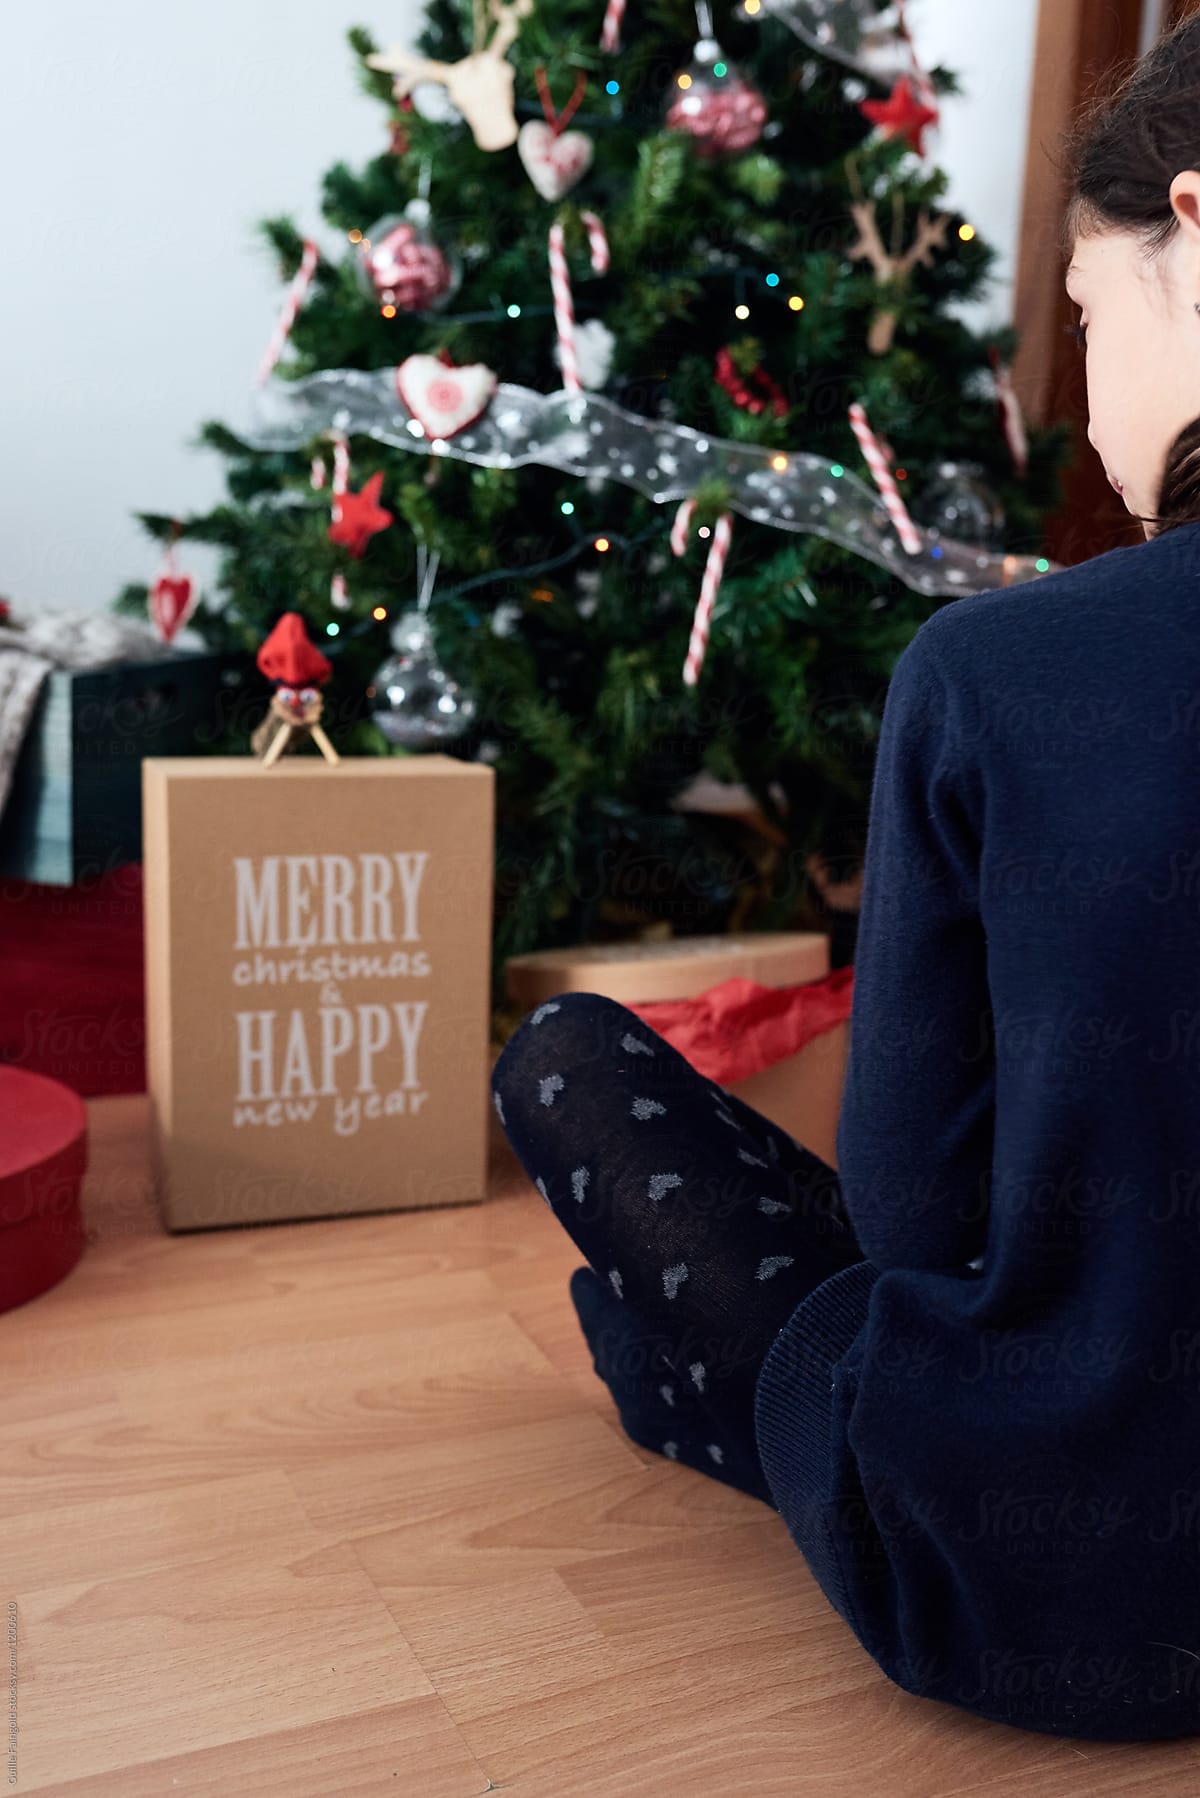 Girl in front of Christmas tree with presents